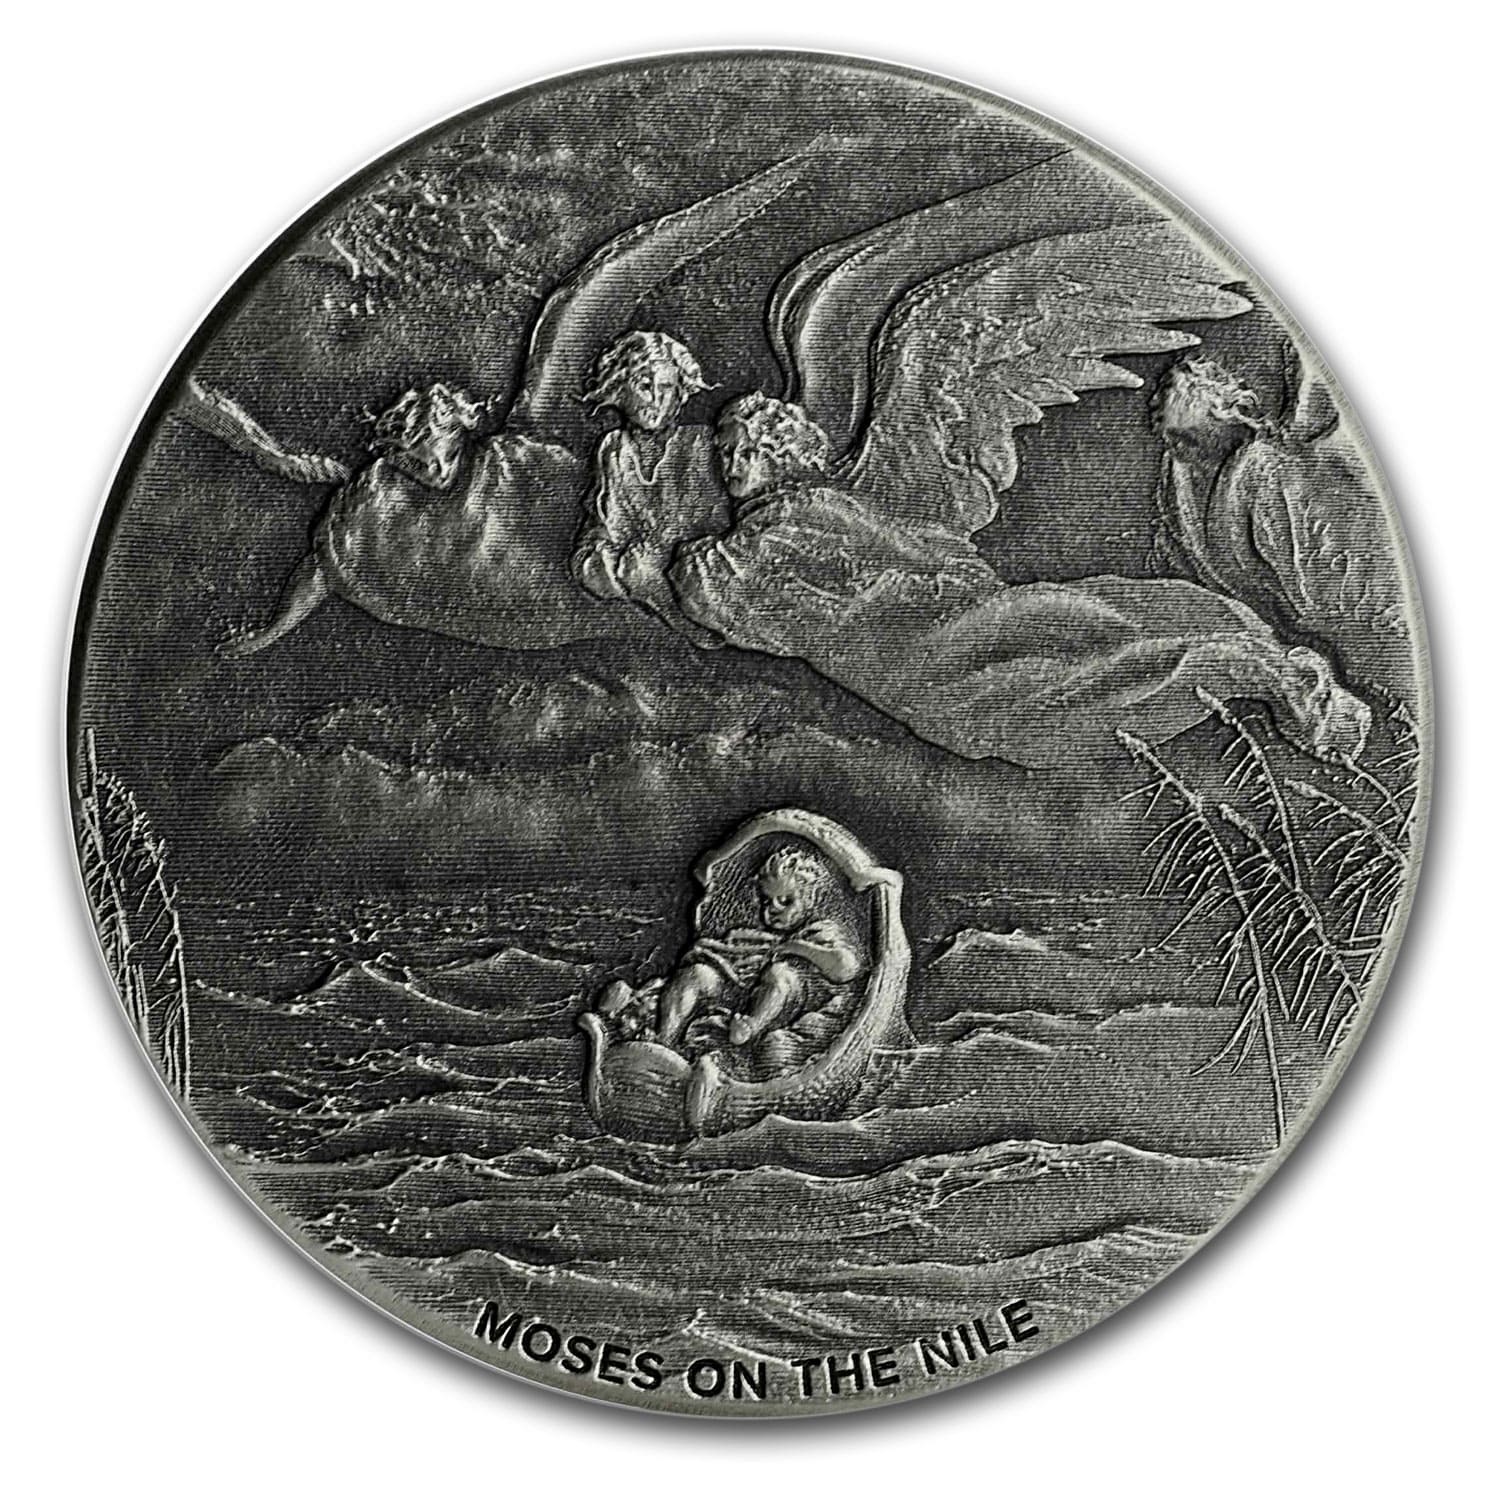 Buy 2019 2 oz Silver Coin - Biblical Series (Moses on the Nile) - Click Image to Close